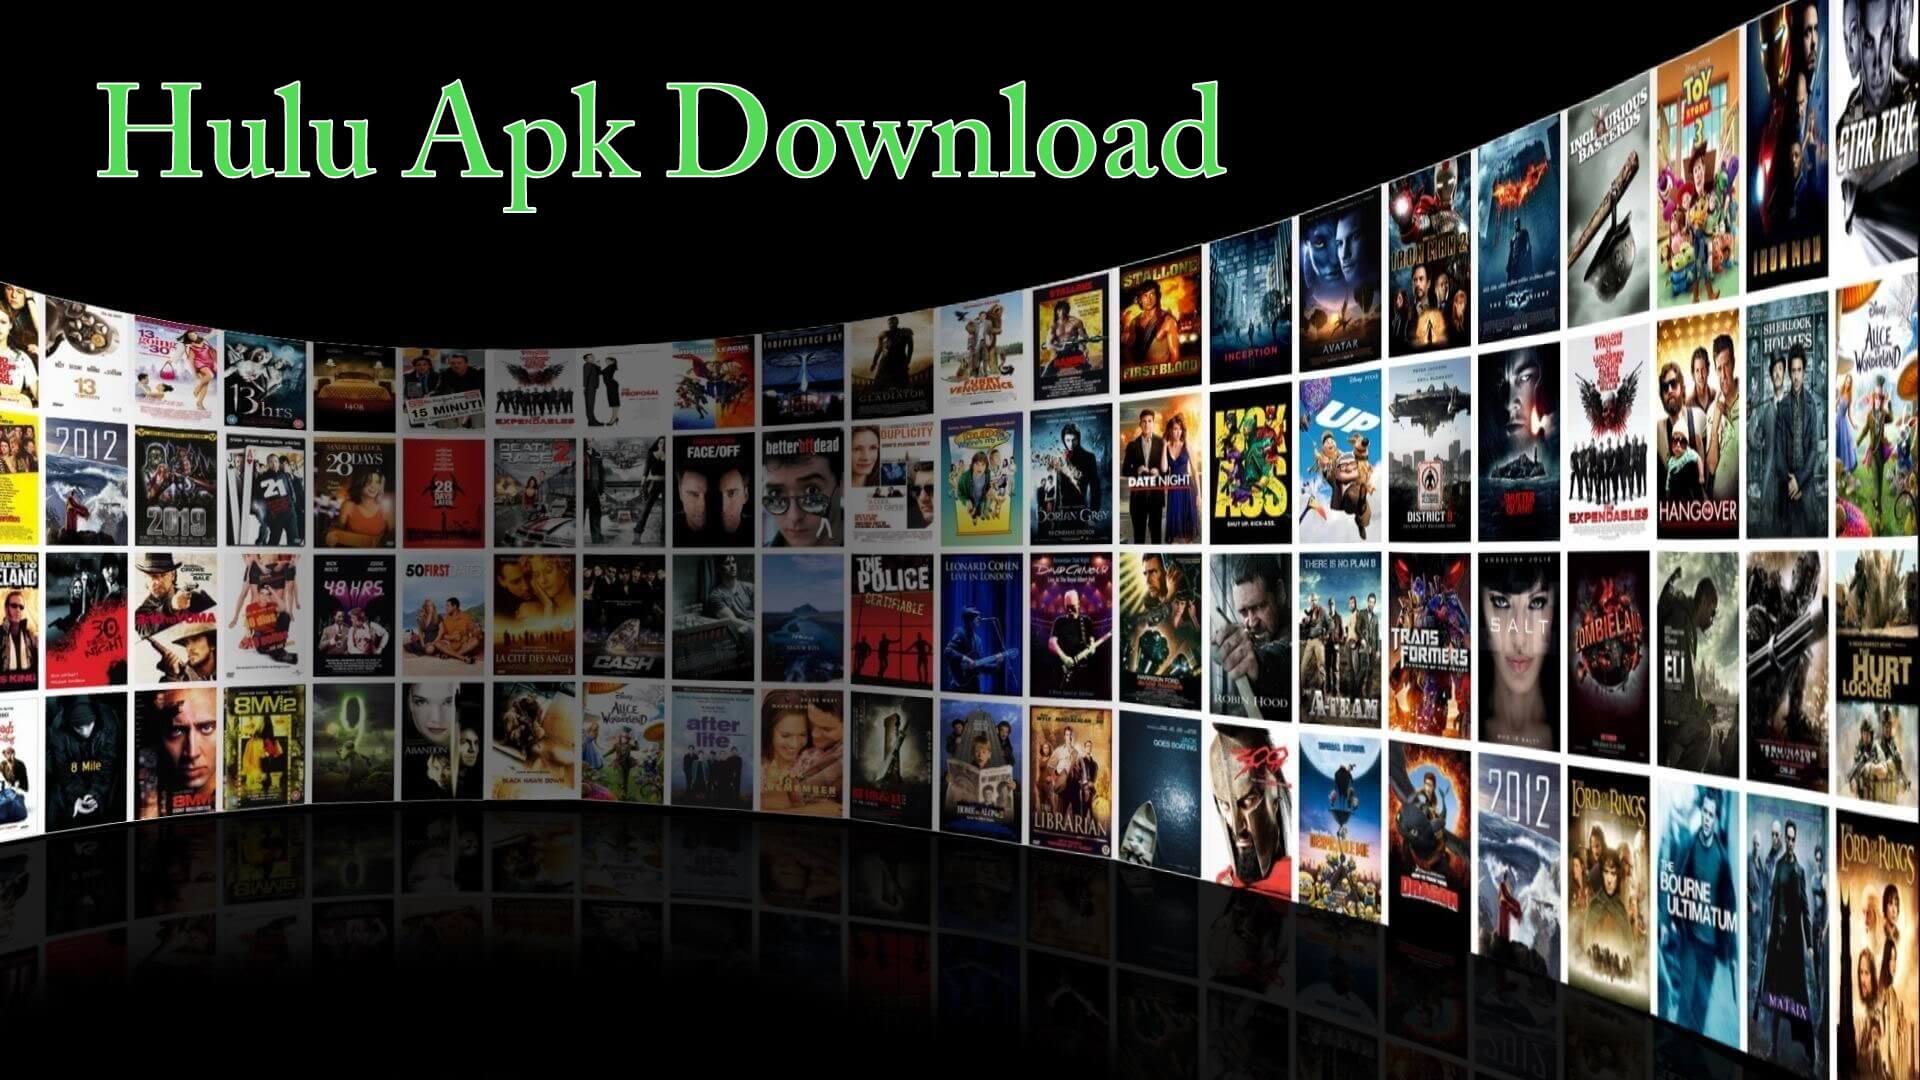 How To Download Hulu Plus Apk On Android Devices?